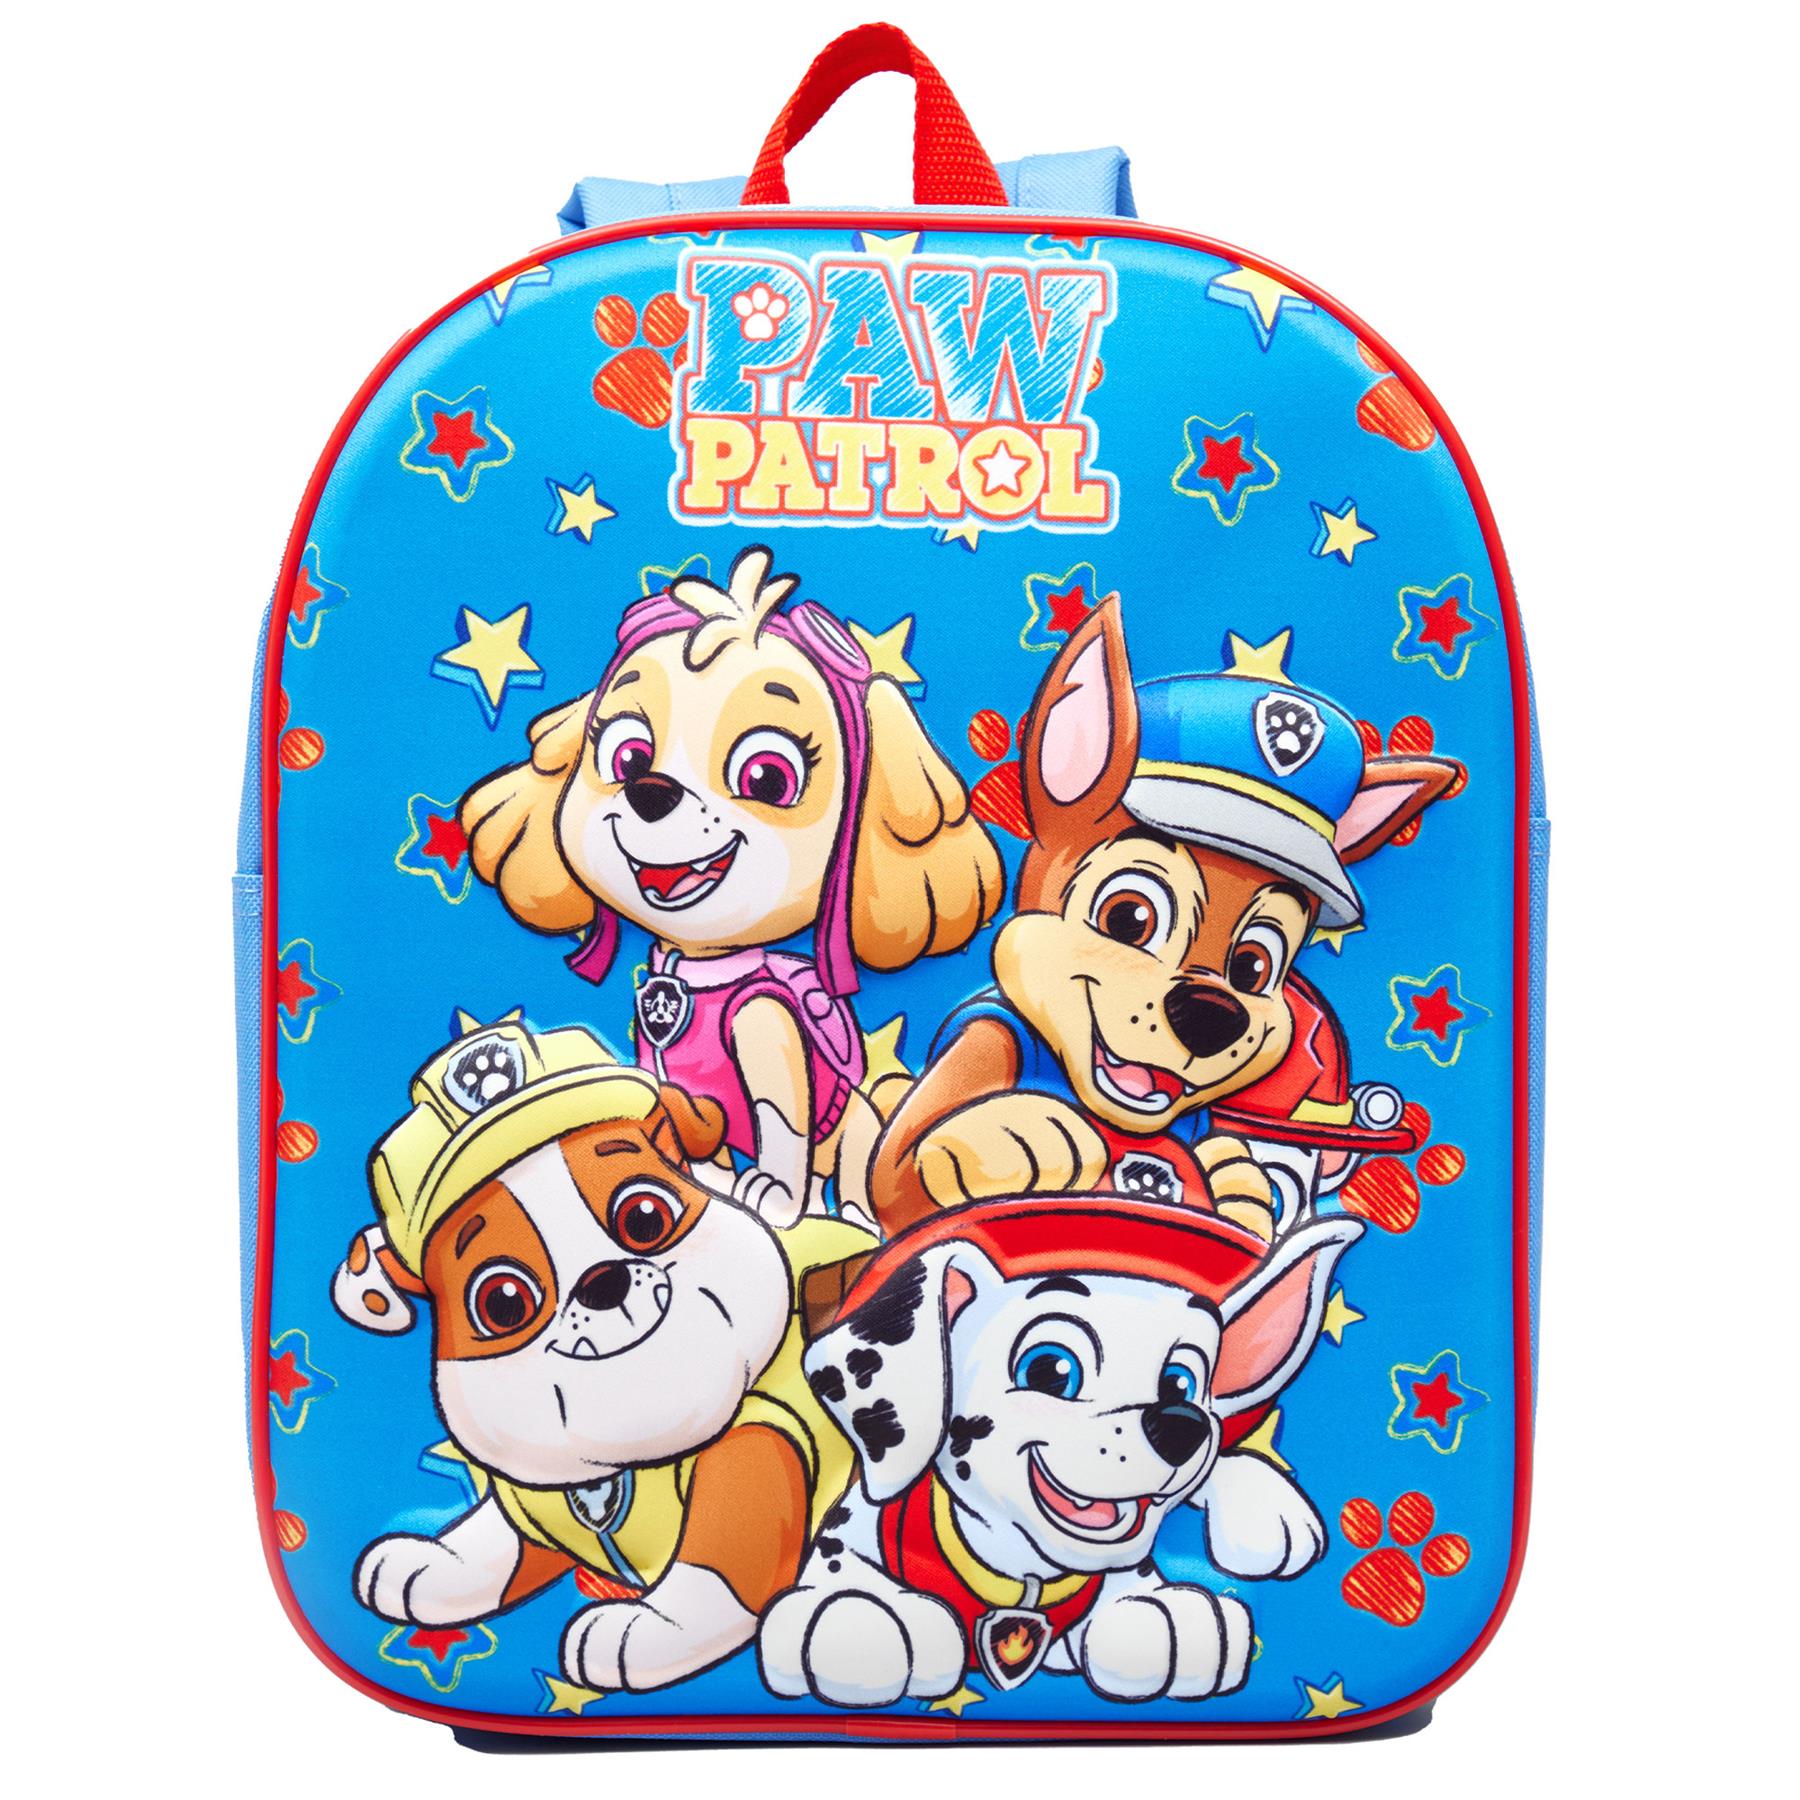 Kids Officially Licensed Paw Patrol Sketch Eva Character School Travel Backpack